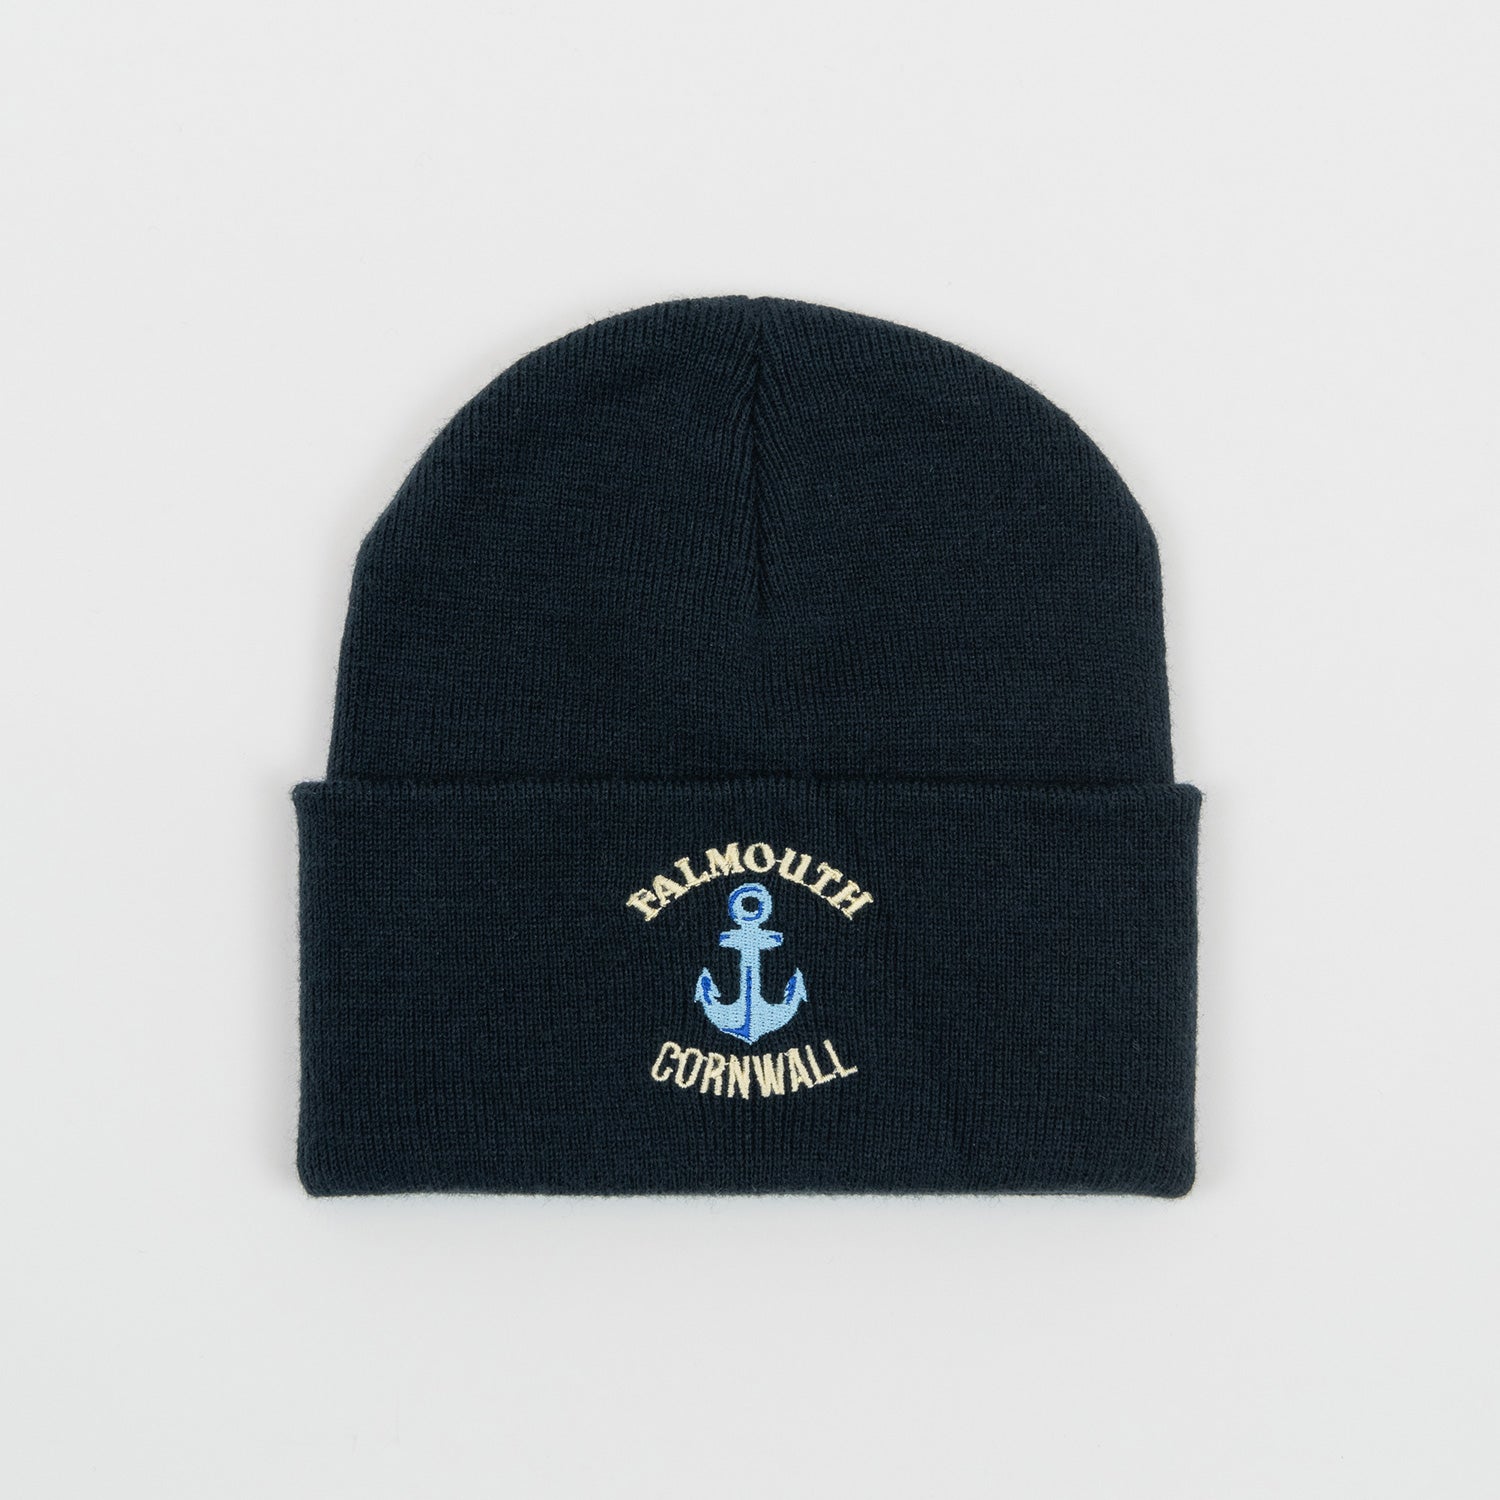 Navy beanie hat with Falmouth, Cornwall embroidered in white around an anchor embroidered in blue